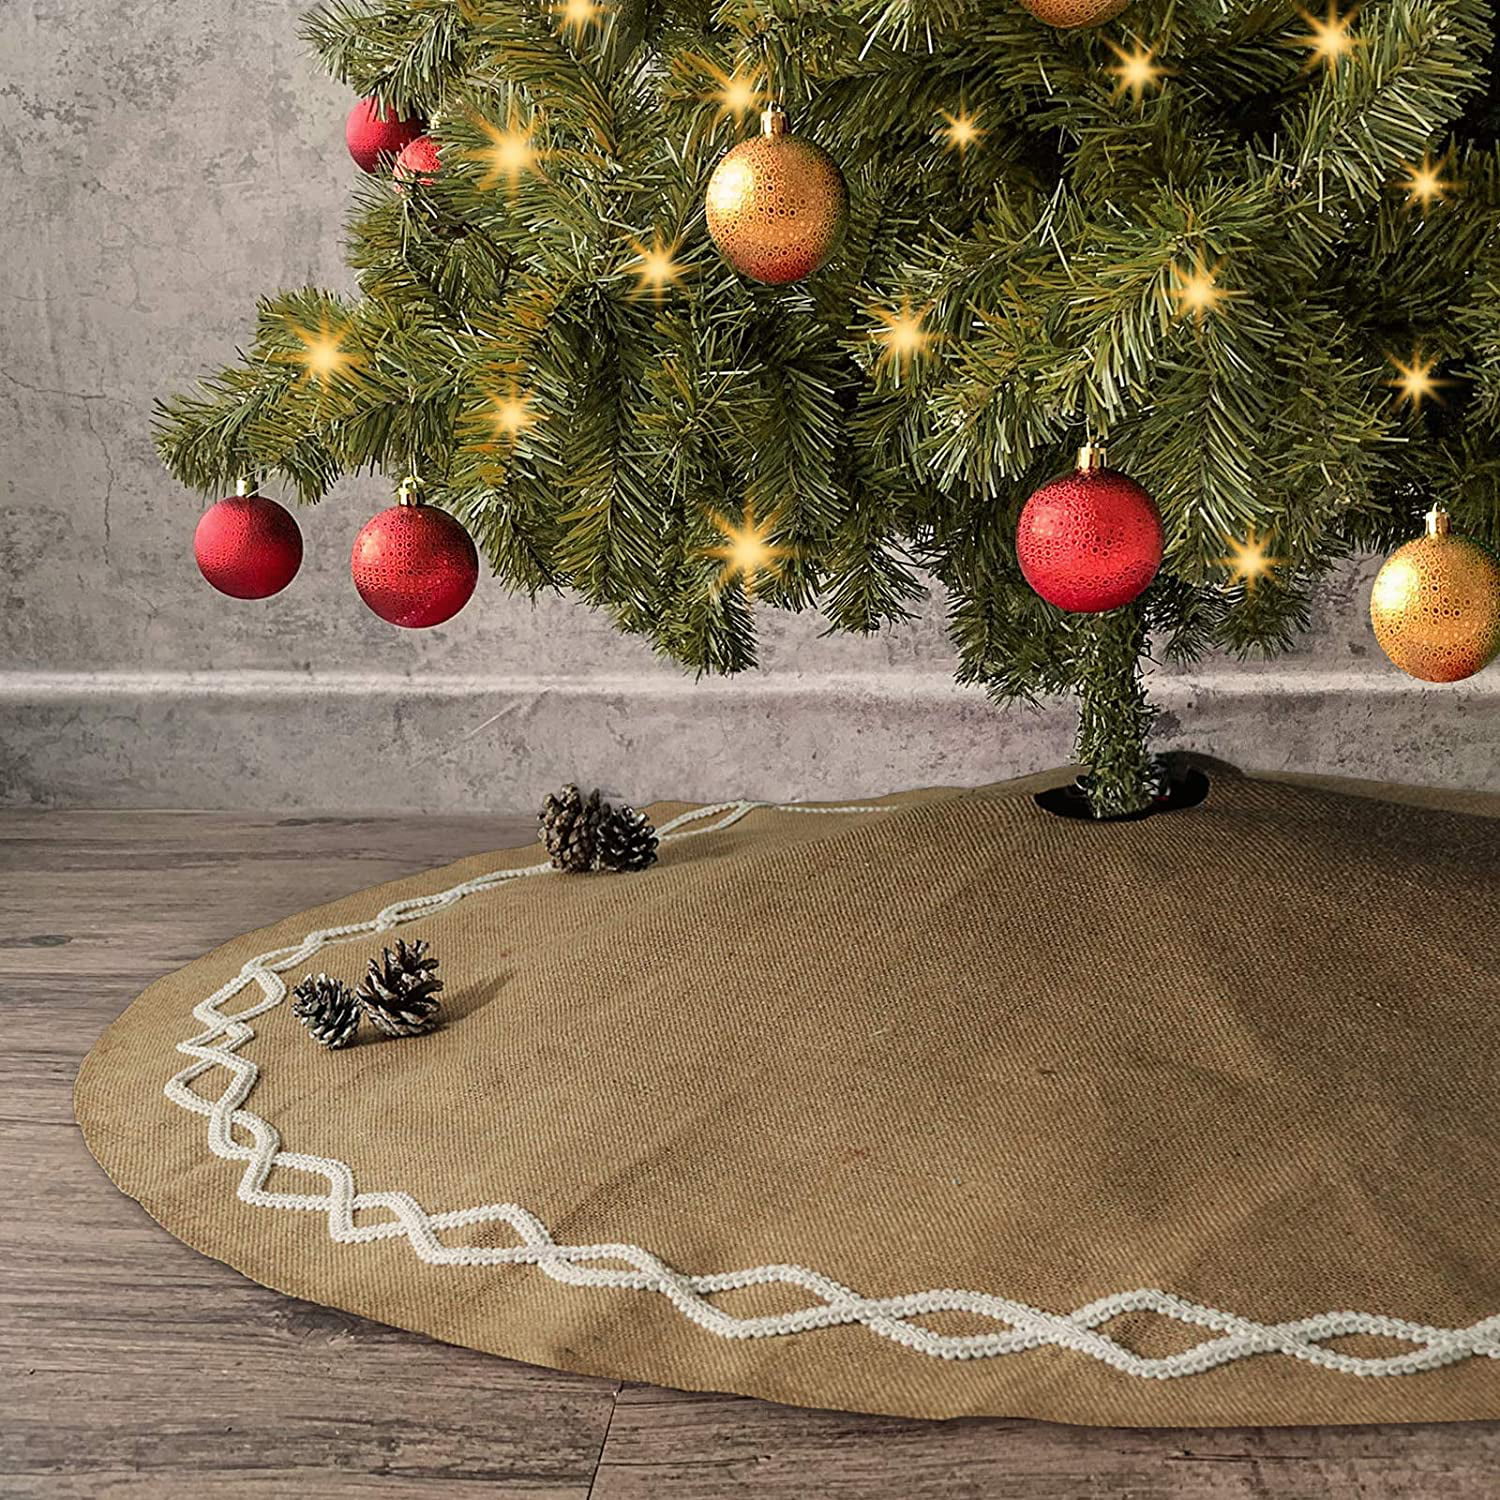 Sofevaim Summer Burlap Christmas Tree Skirt,48 Rustic Jute Double Layers Xmas Tree for Holiday Party Home Farmhouse Countryside Outdoor Decorations.